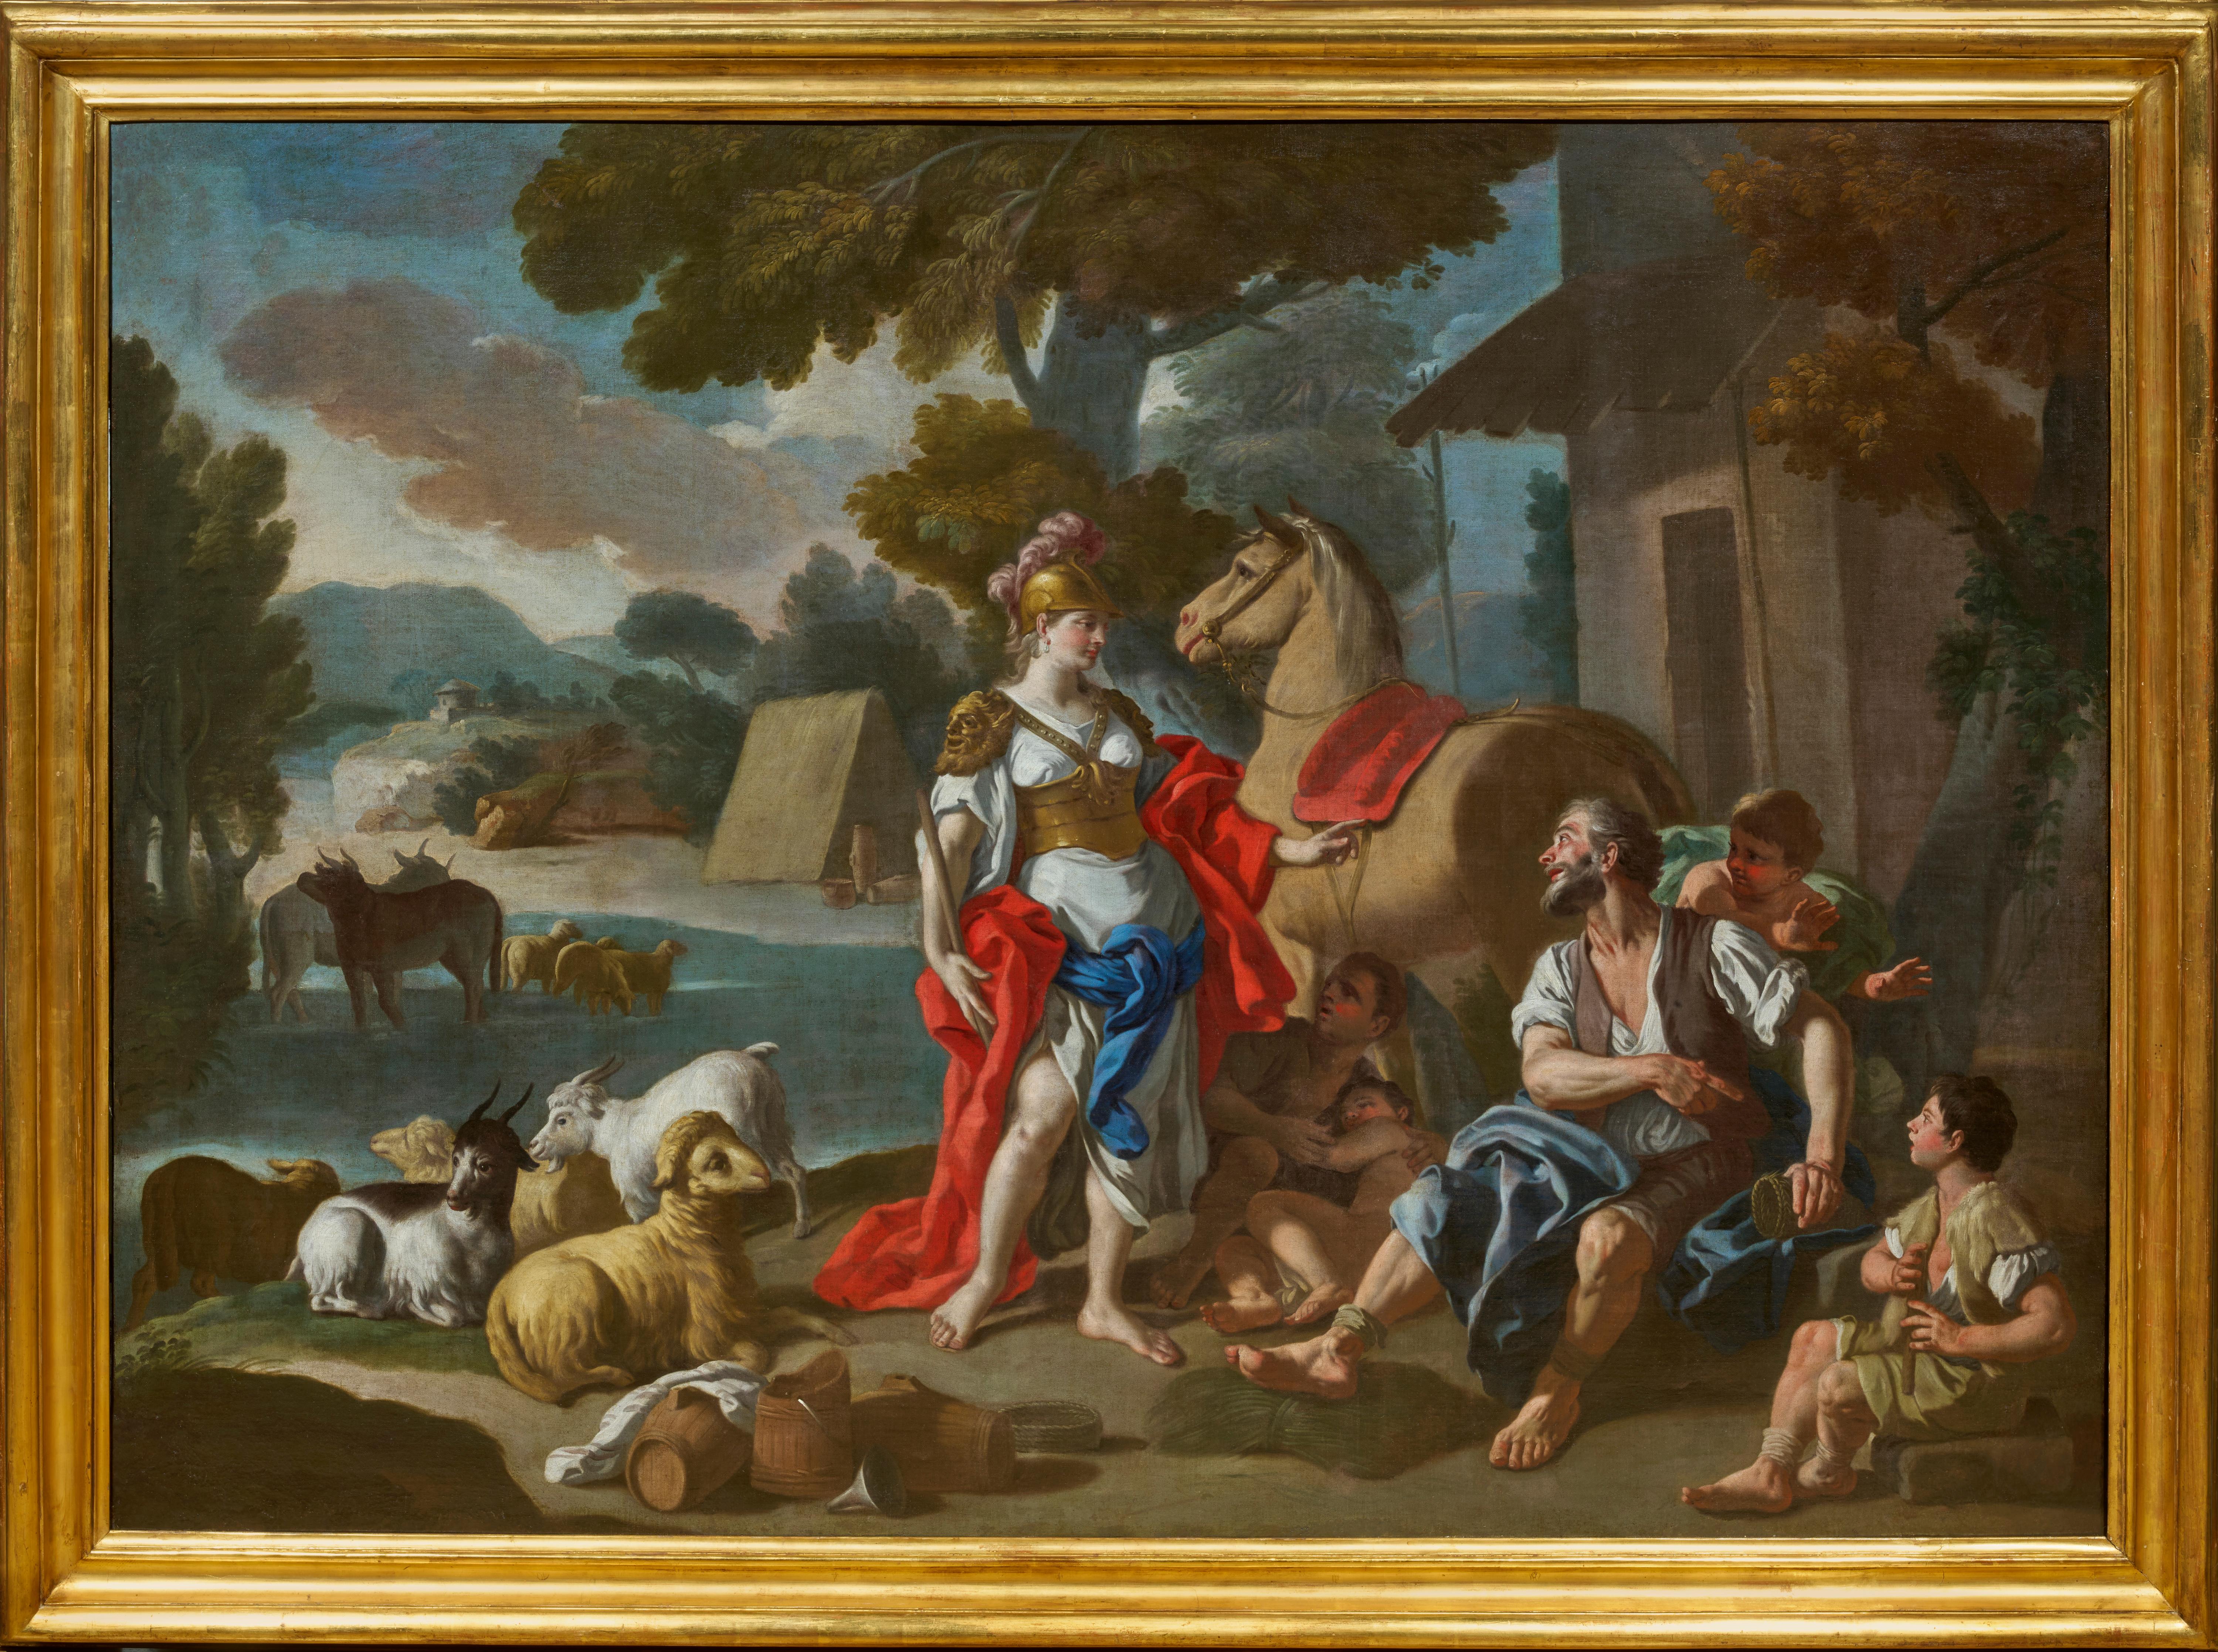 In this masterly painting, Francesco de Mura presents the meeting of Herminia and the shepherds, a famous episode taken from the seventh canto of Torquato Tasso's Jerusalem Delivered. The artist is offering us a synthesis of the chromatic seductions